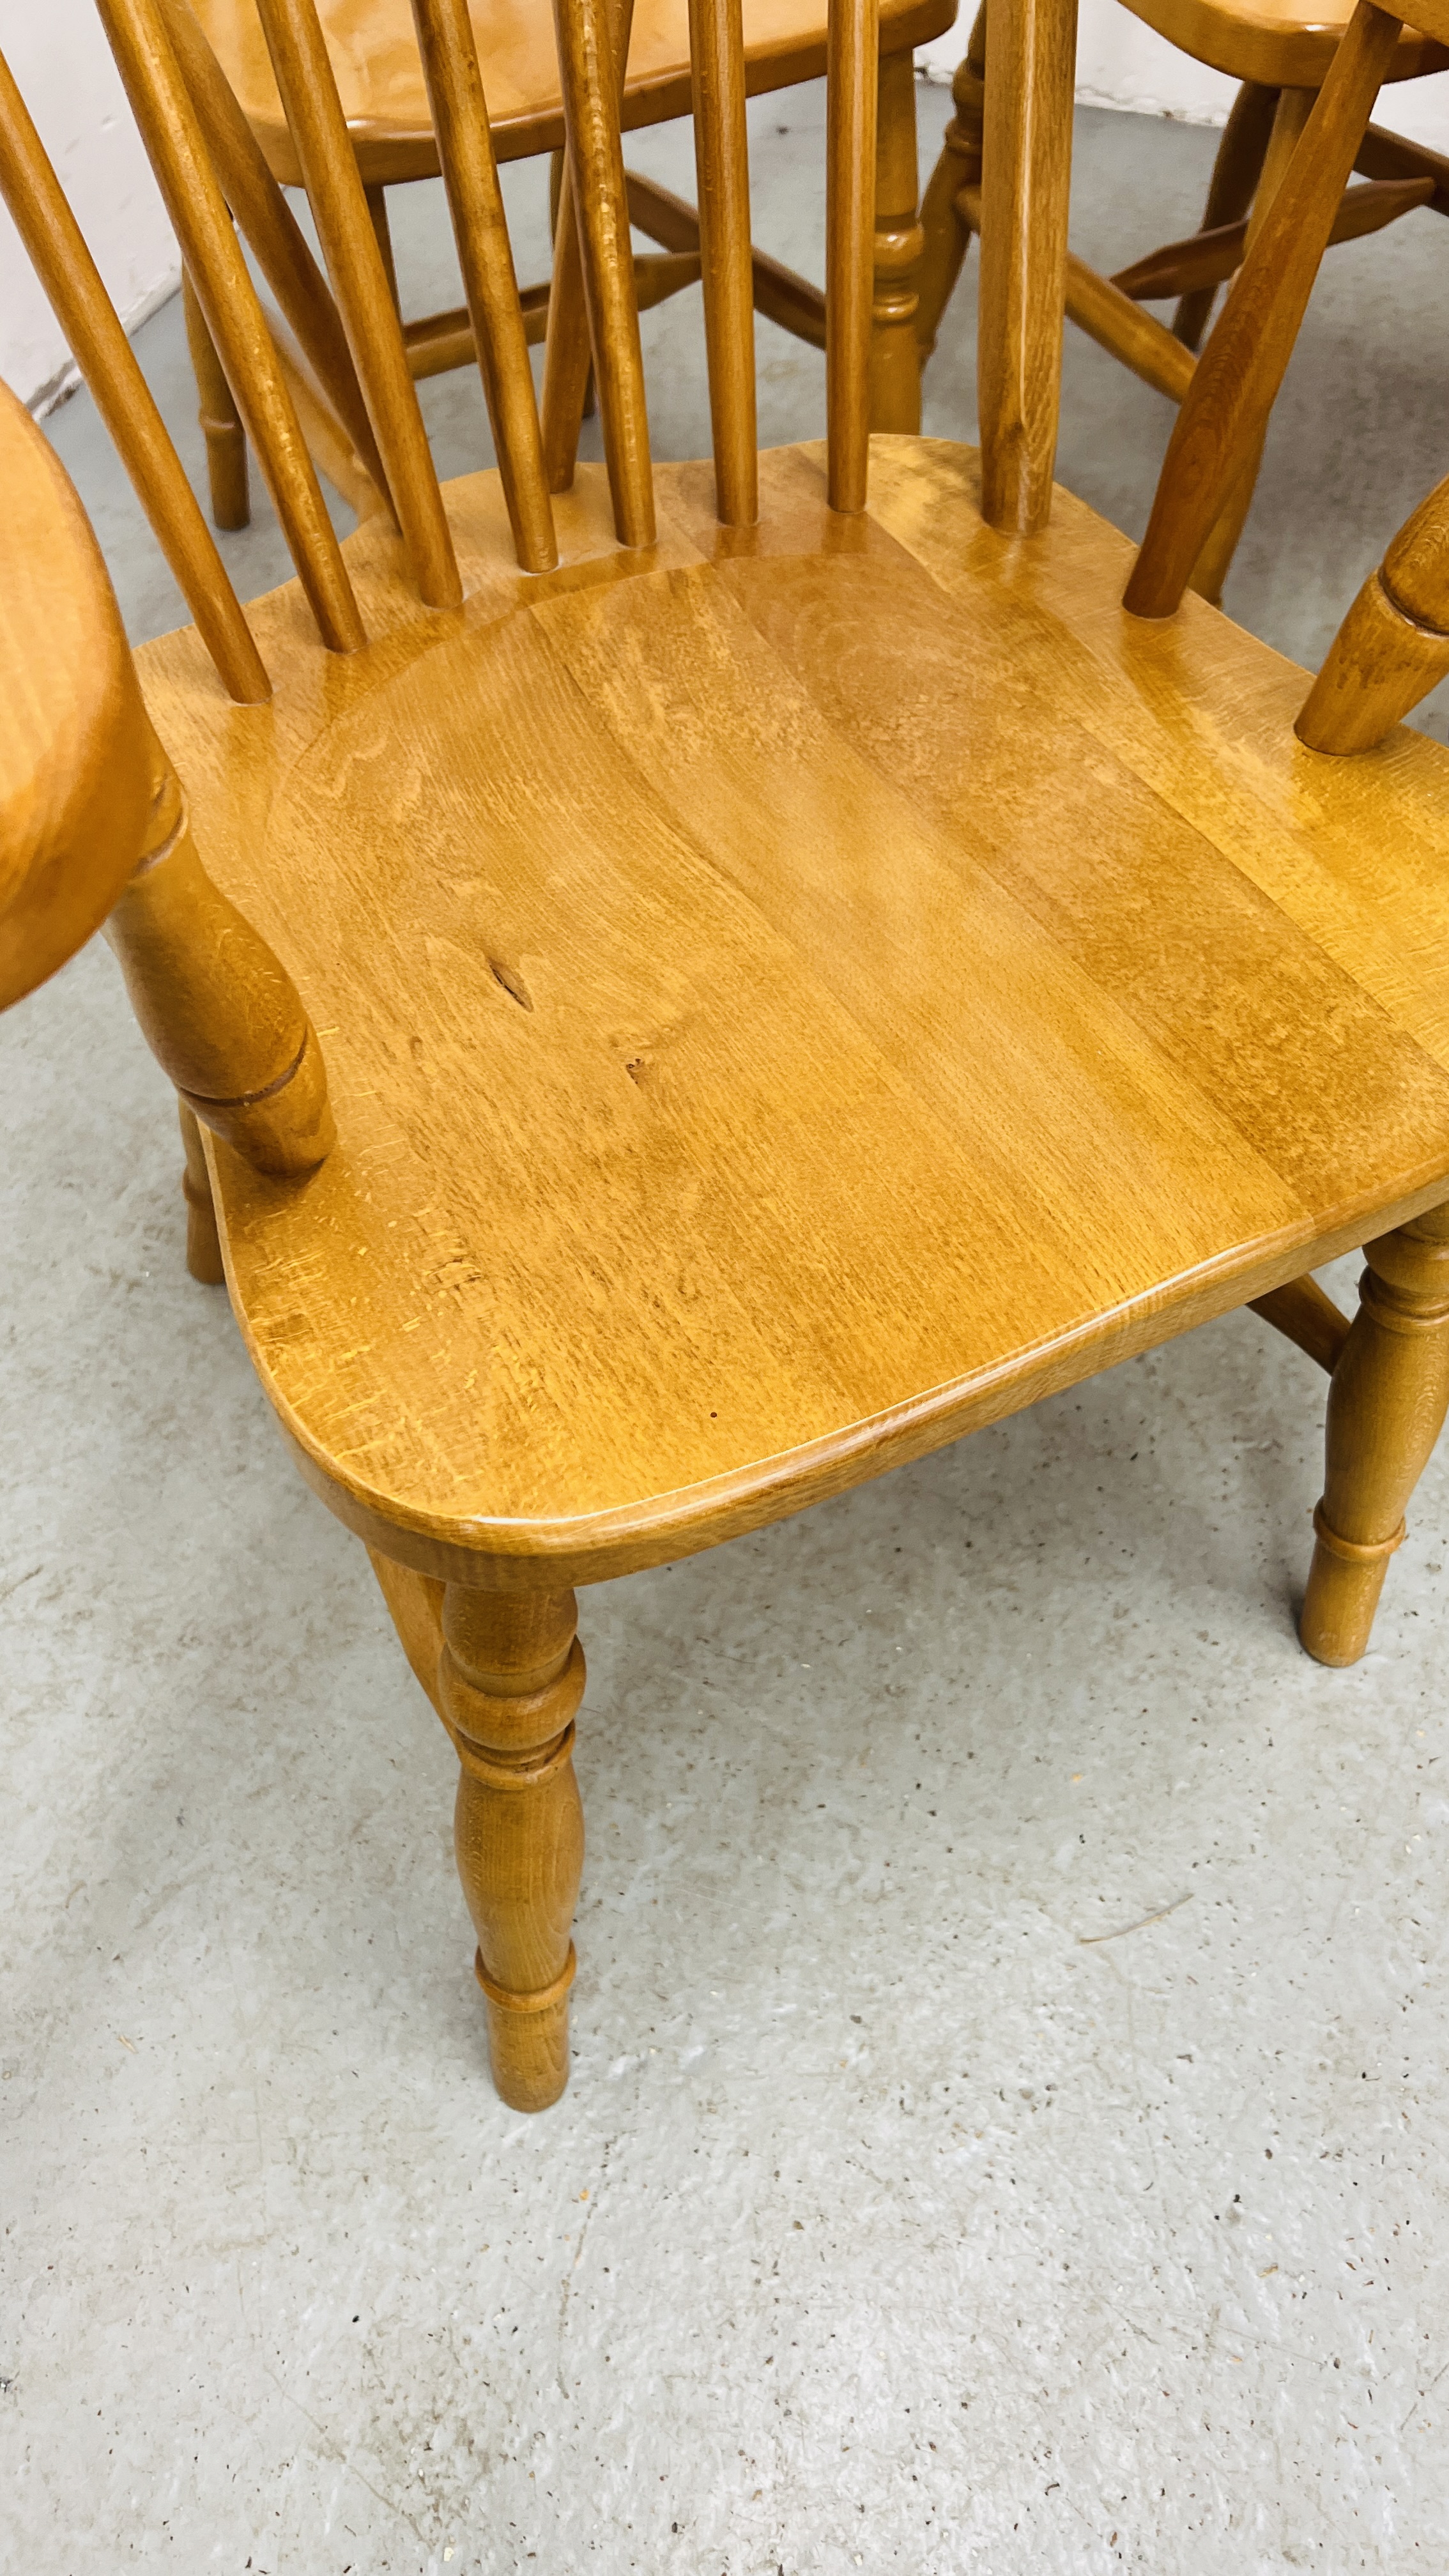 A SET OF SIX SOLID BEECH WOOD KITCHEN CHAIRS (4 X SIDE, - Image 8 of 17